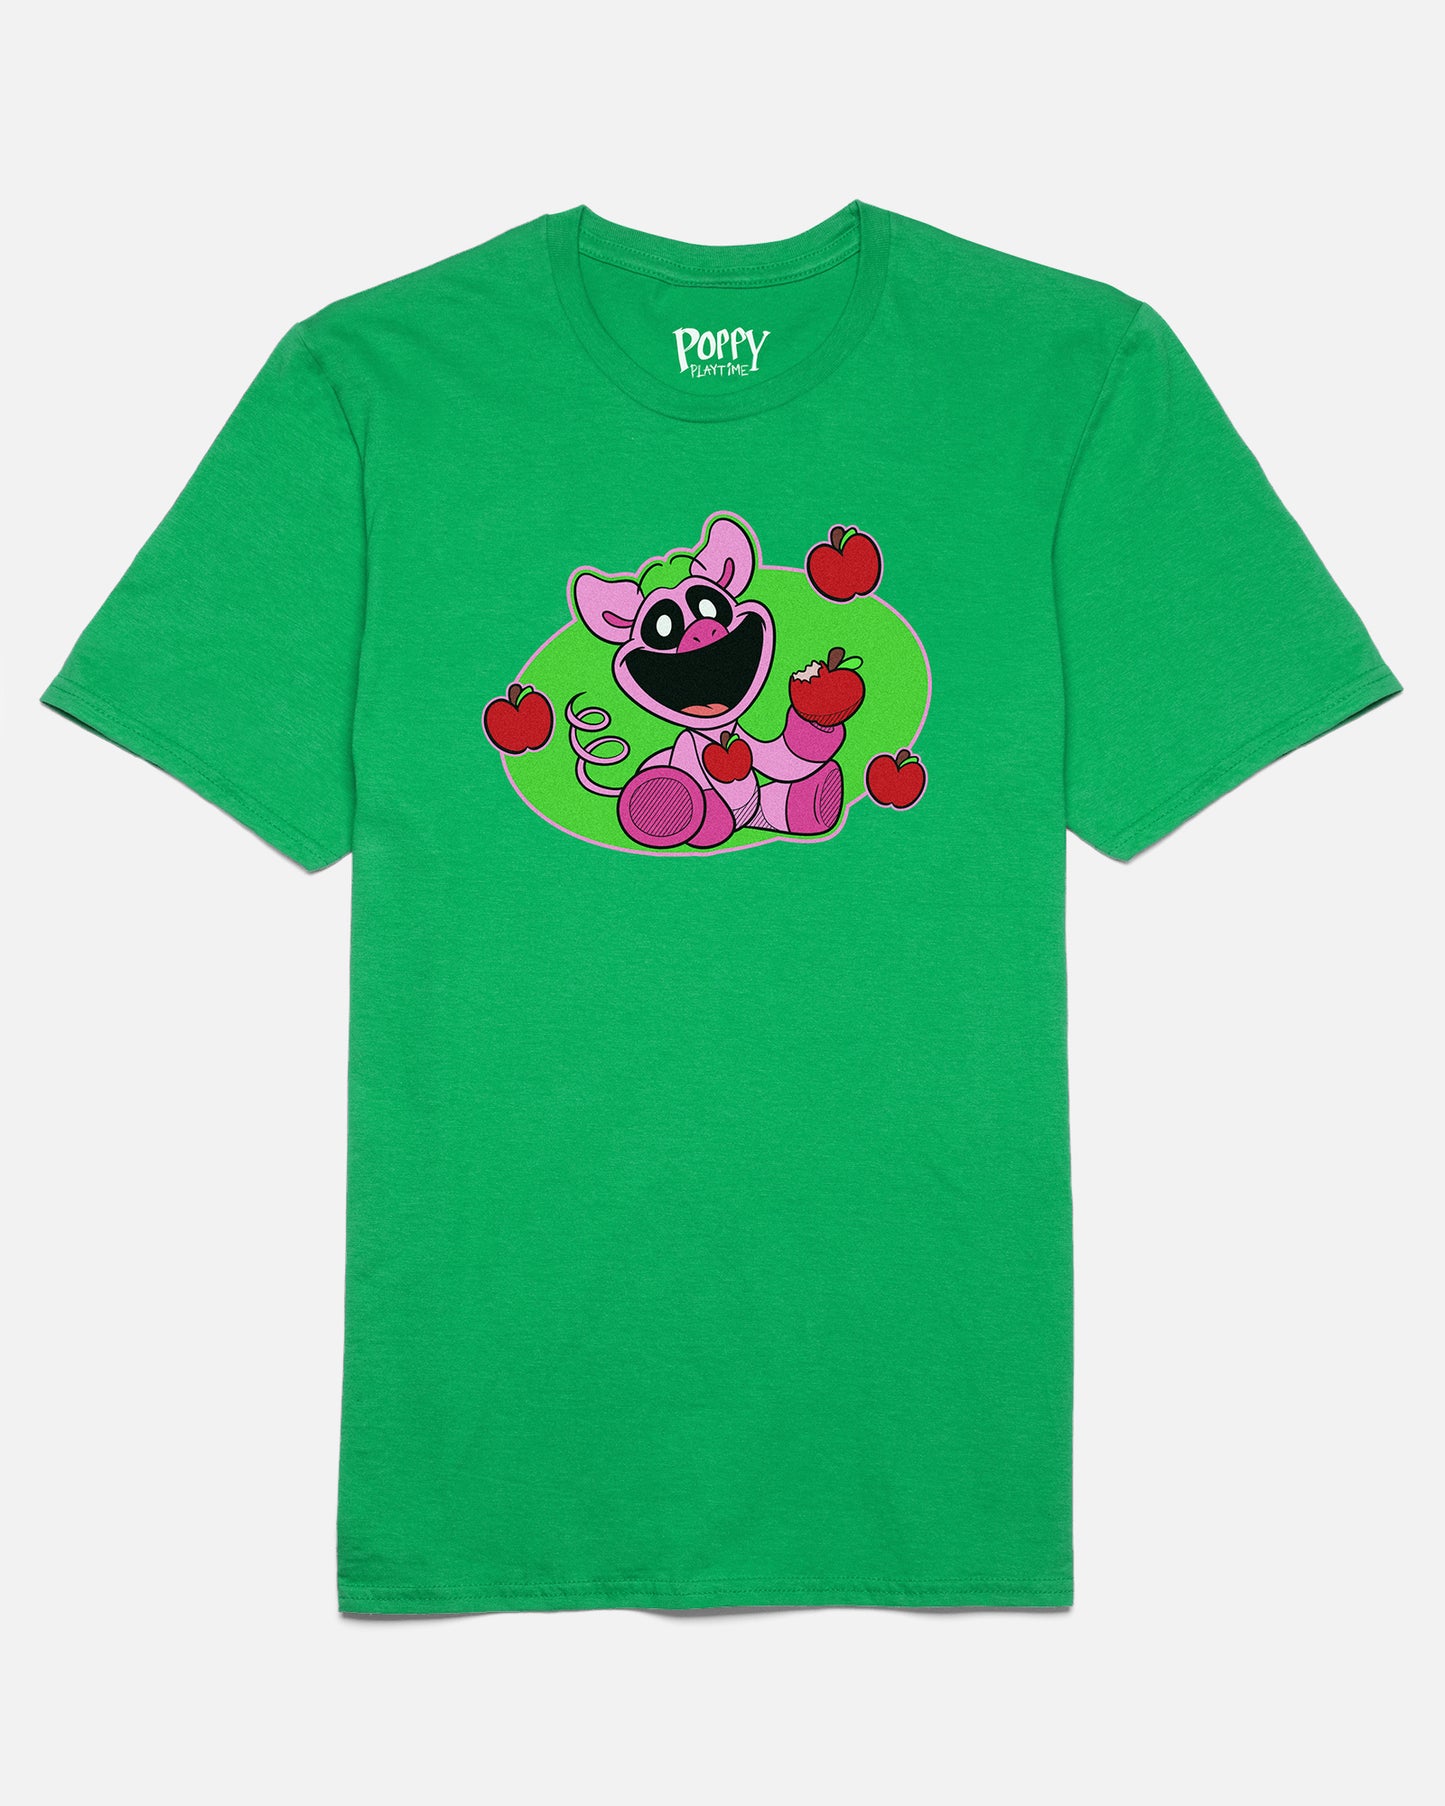 pickypiggy smiling critters tee. image: pig sitting down eating apple. wearing apple charm. apples around it.